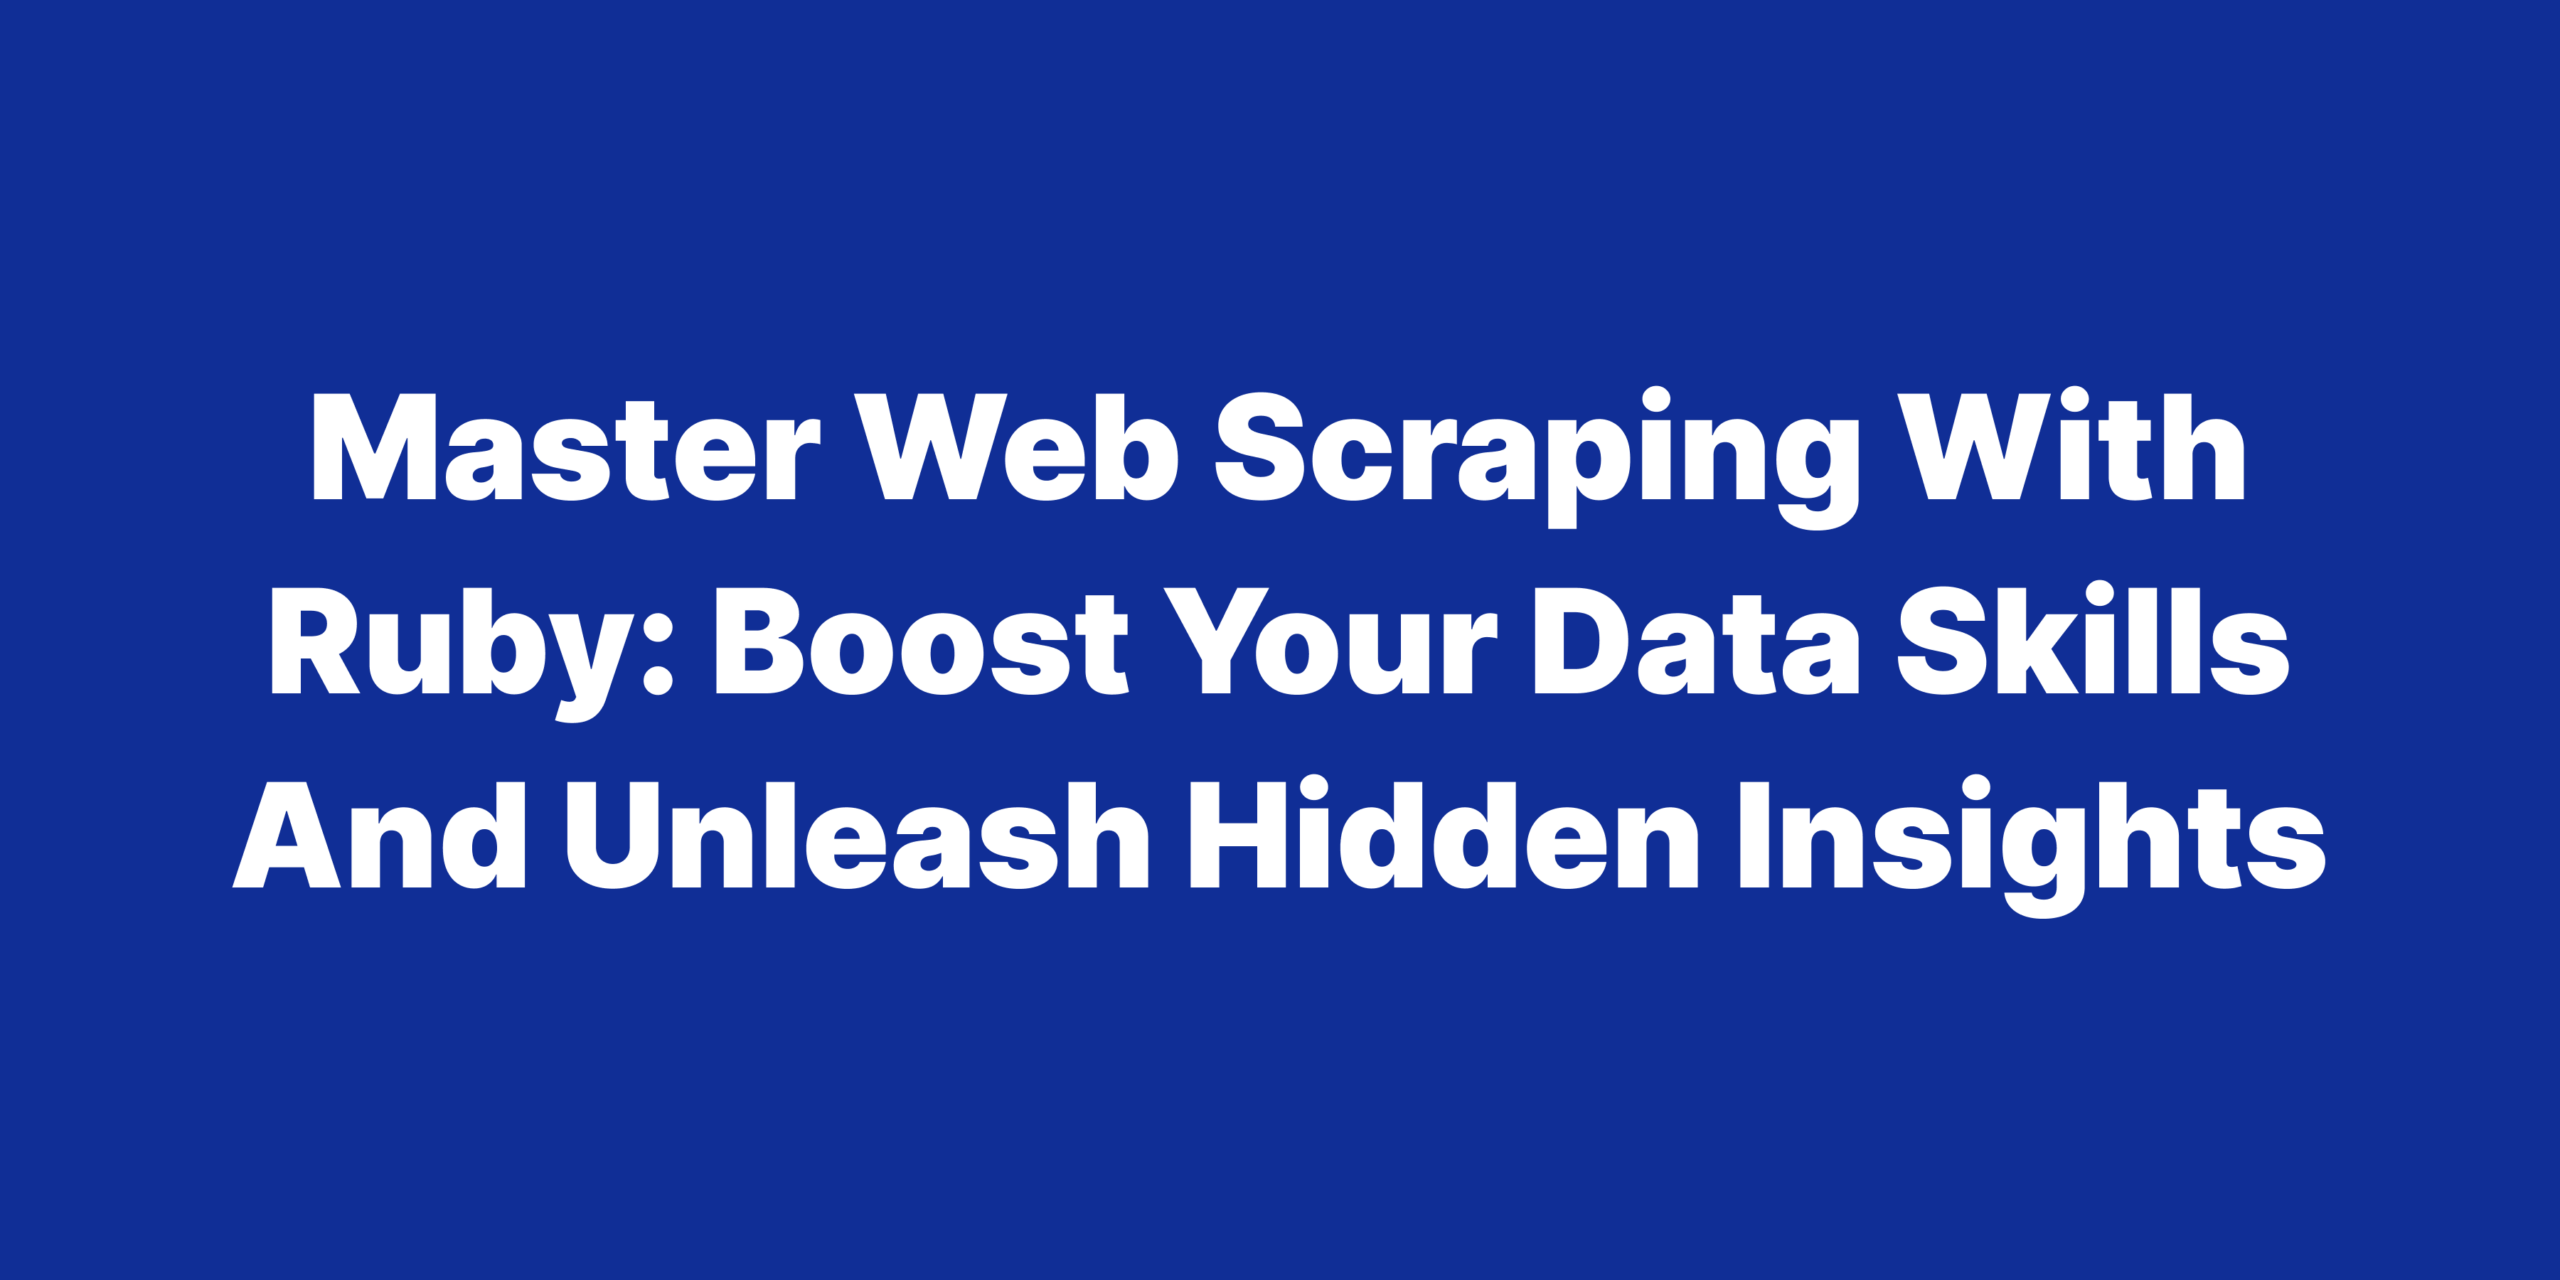 Master Web Scraping with Ruby Boost Your Data Skills and Unleash Hidden Insights